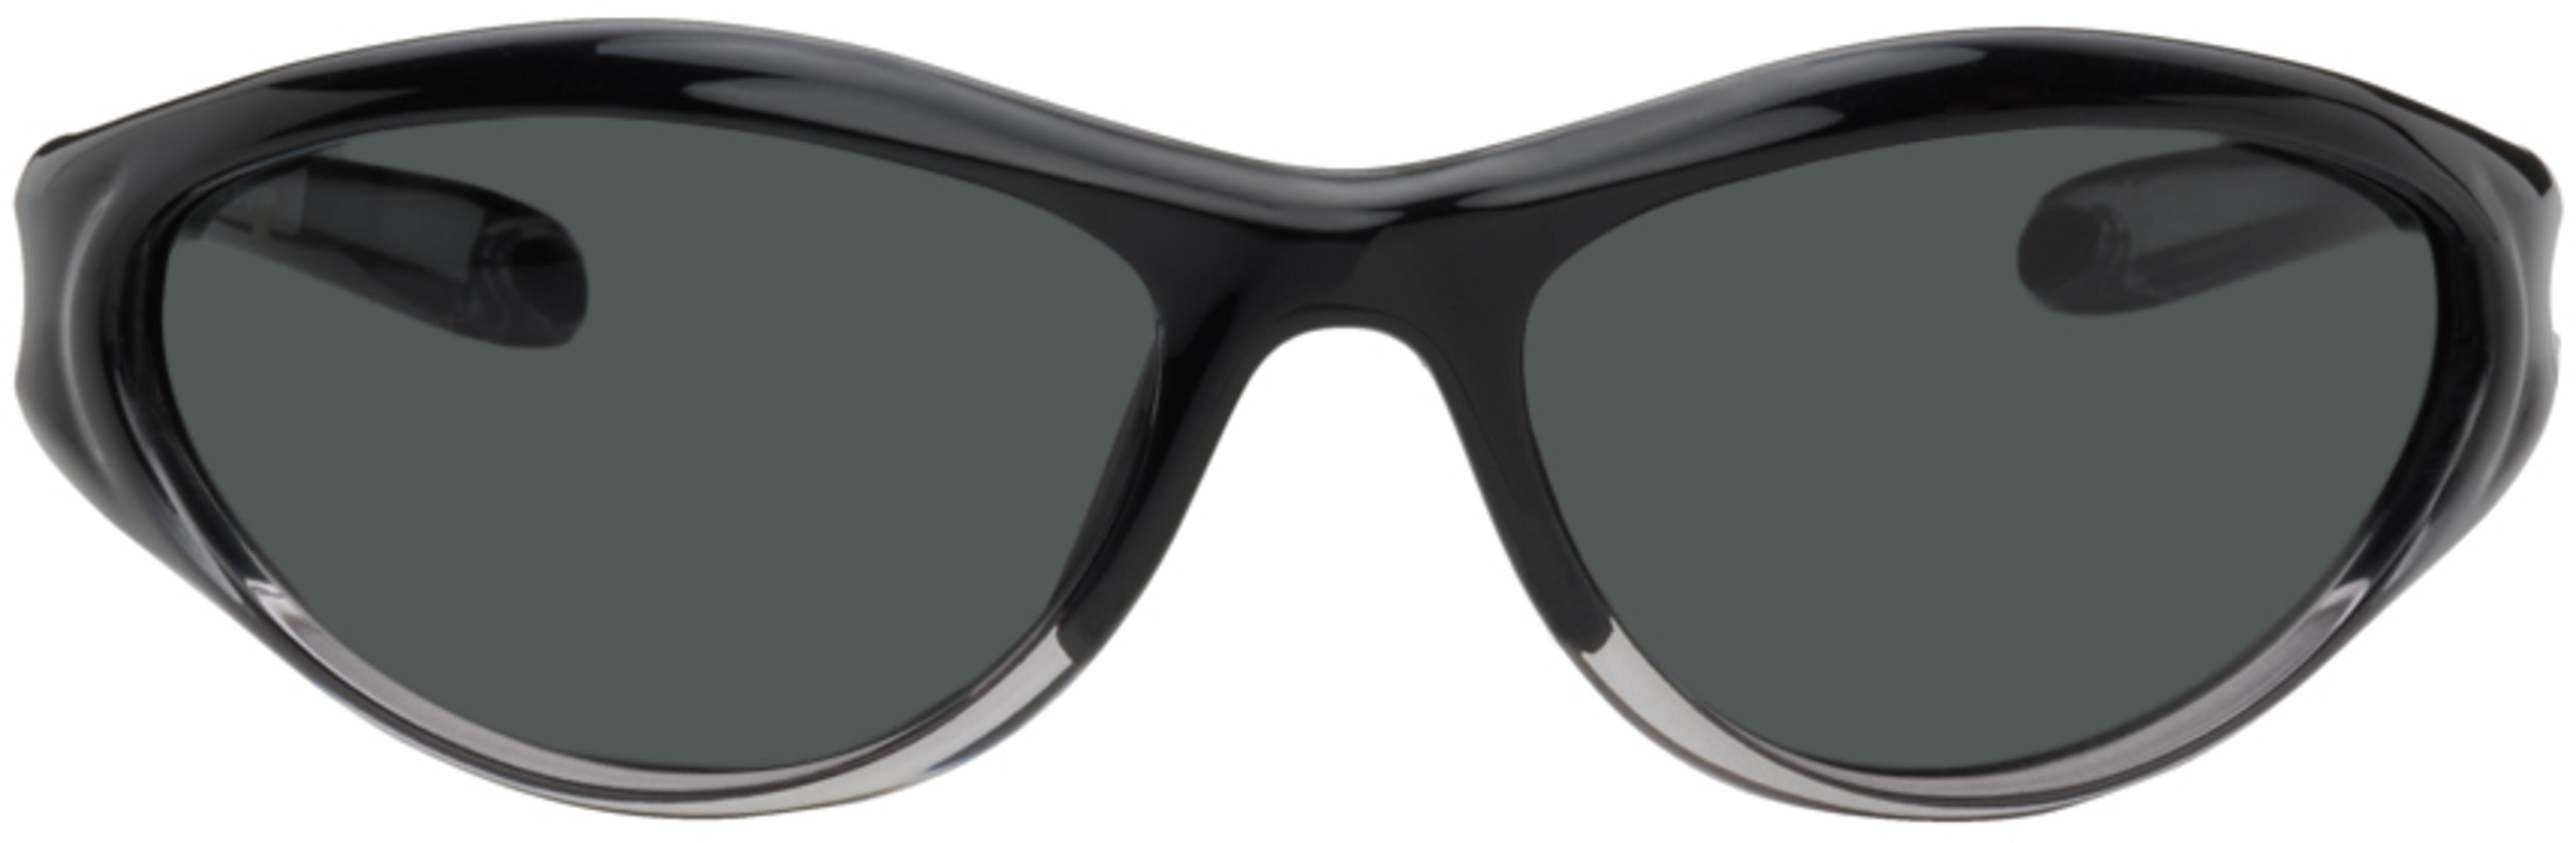 Black Angel Sunglasses by BONNIE CLYDE